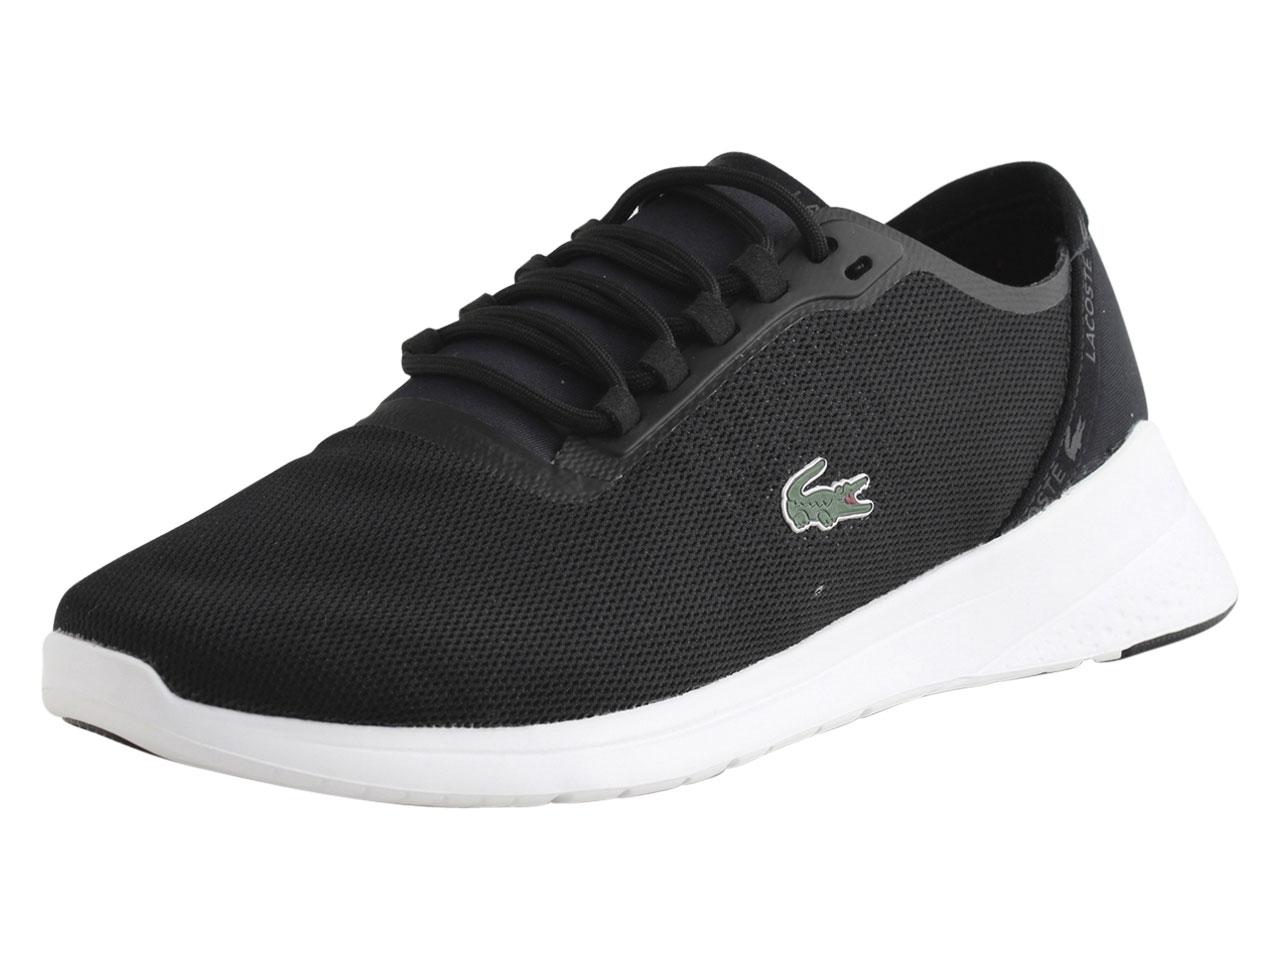 LT-Fit-118 Low-Top Sneakers Shoes